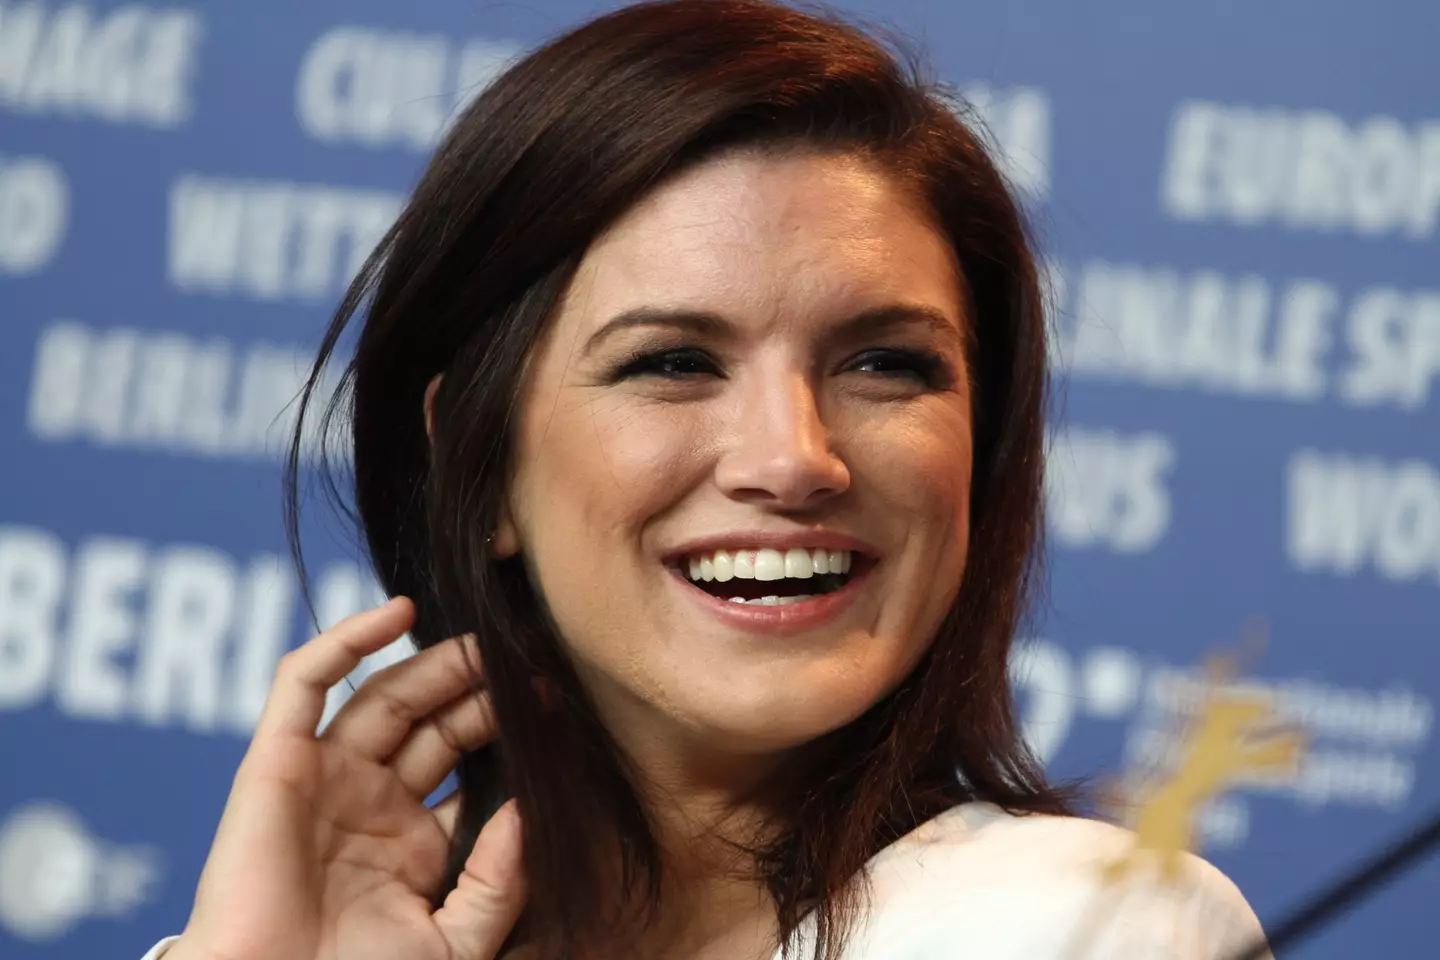 Gina Carano has spoken out against cancel culture.